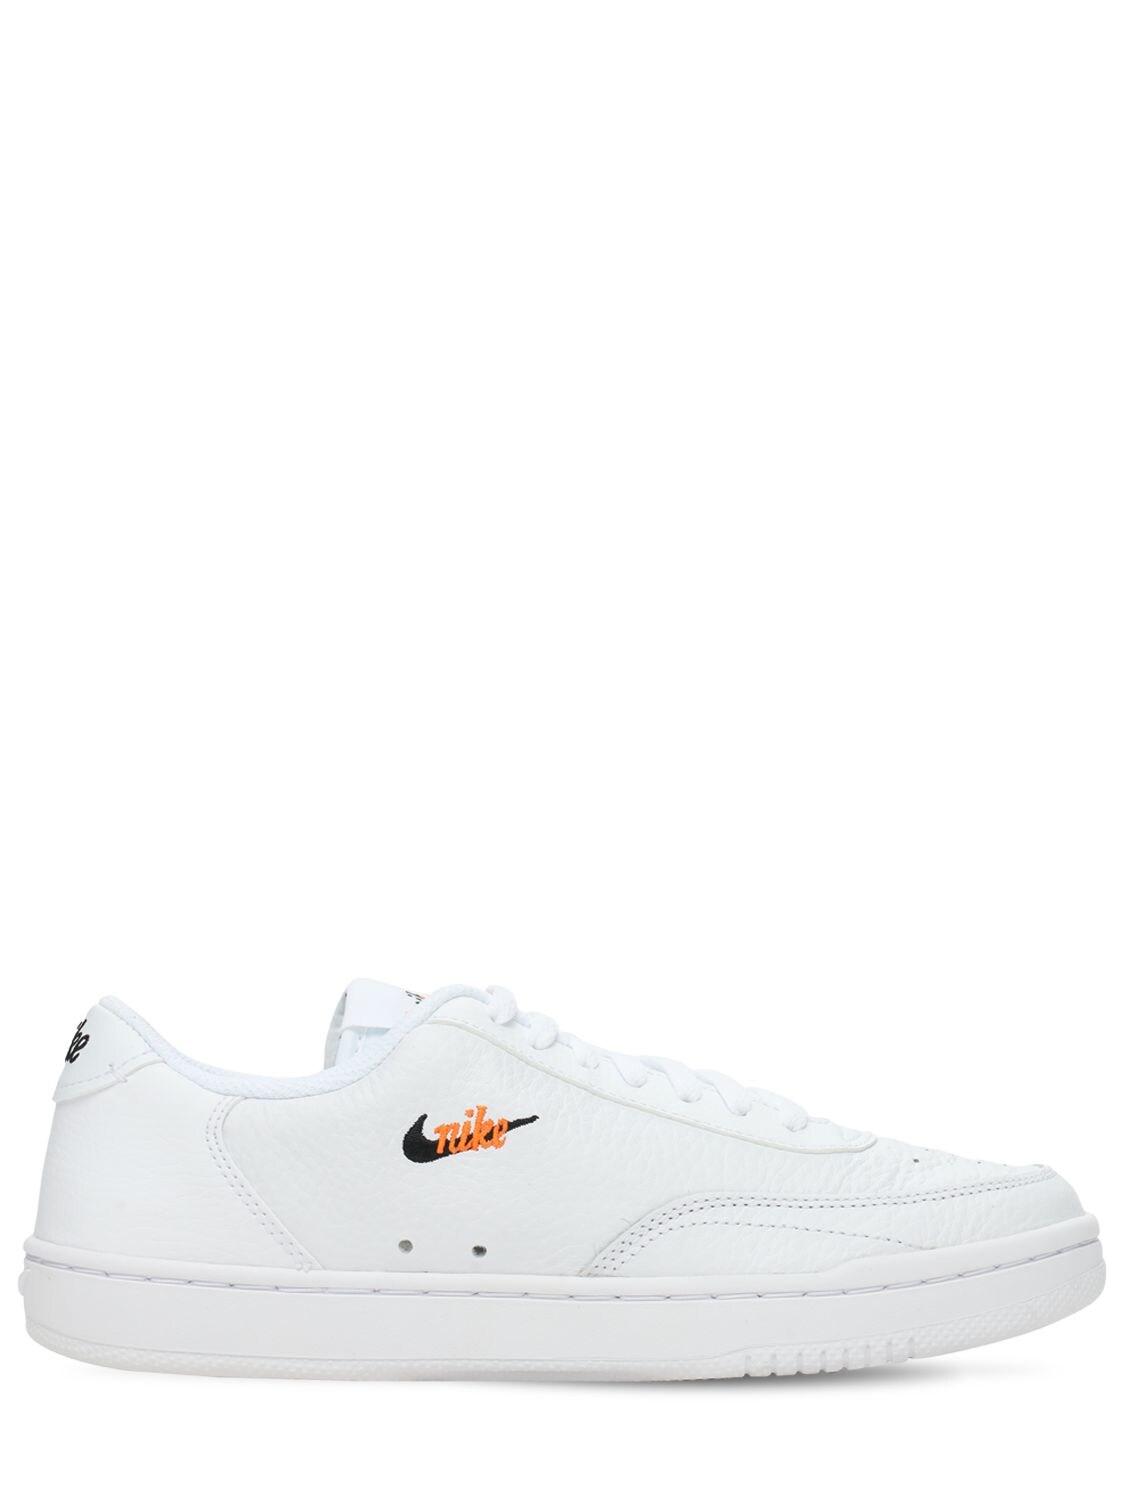 Nike Leather Court Vintage Premium in White - Save 41% - Lyst